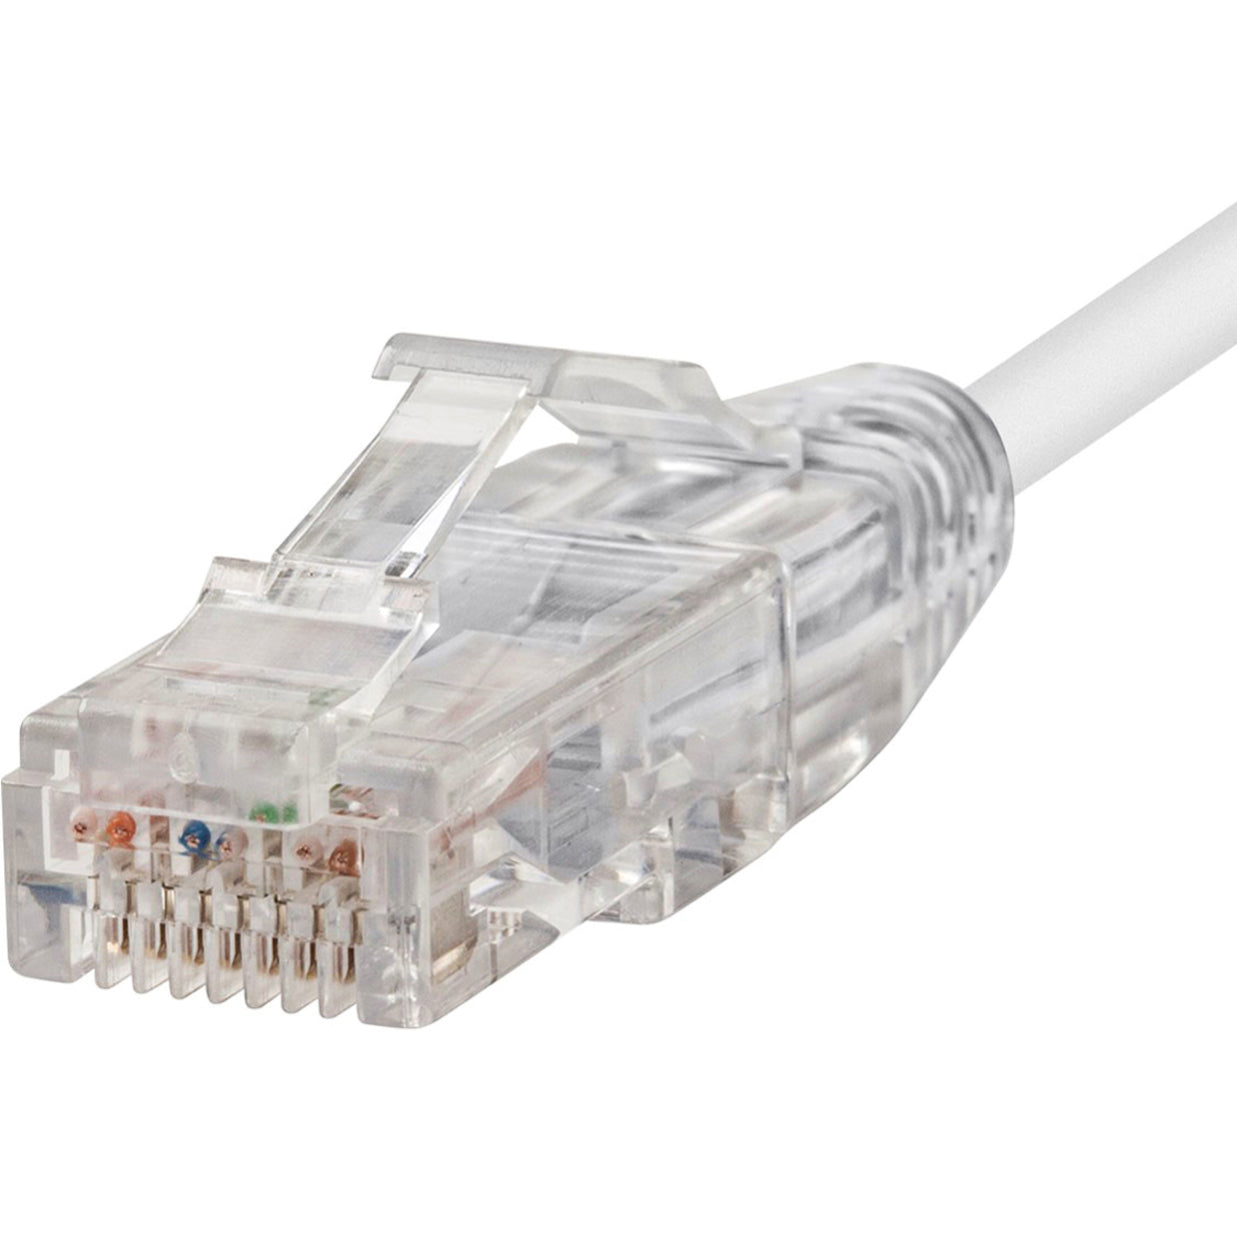 Monoprice 13555 SlimRun Cat6 20ft White Ethernet Network Cable, Flexible and Snagless